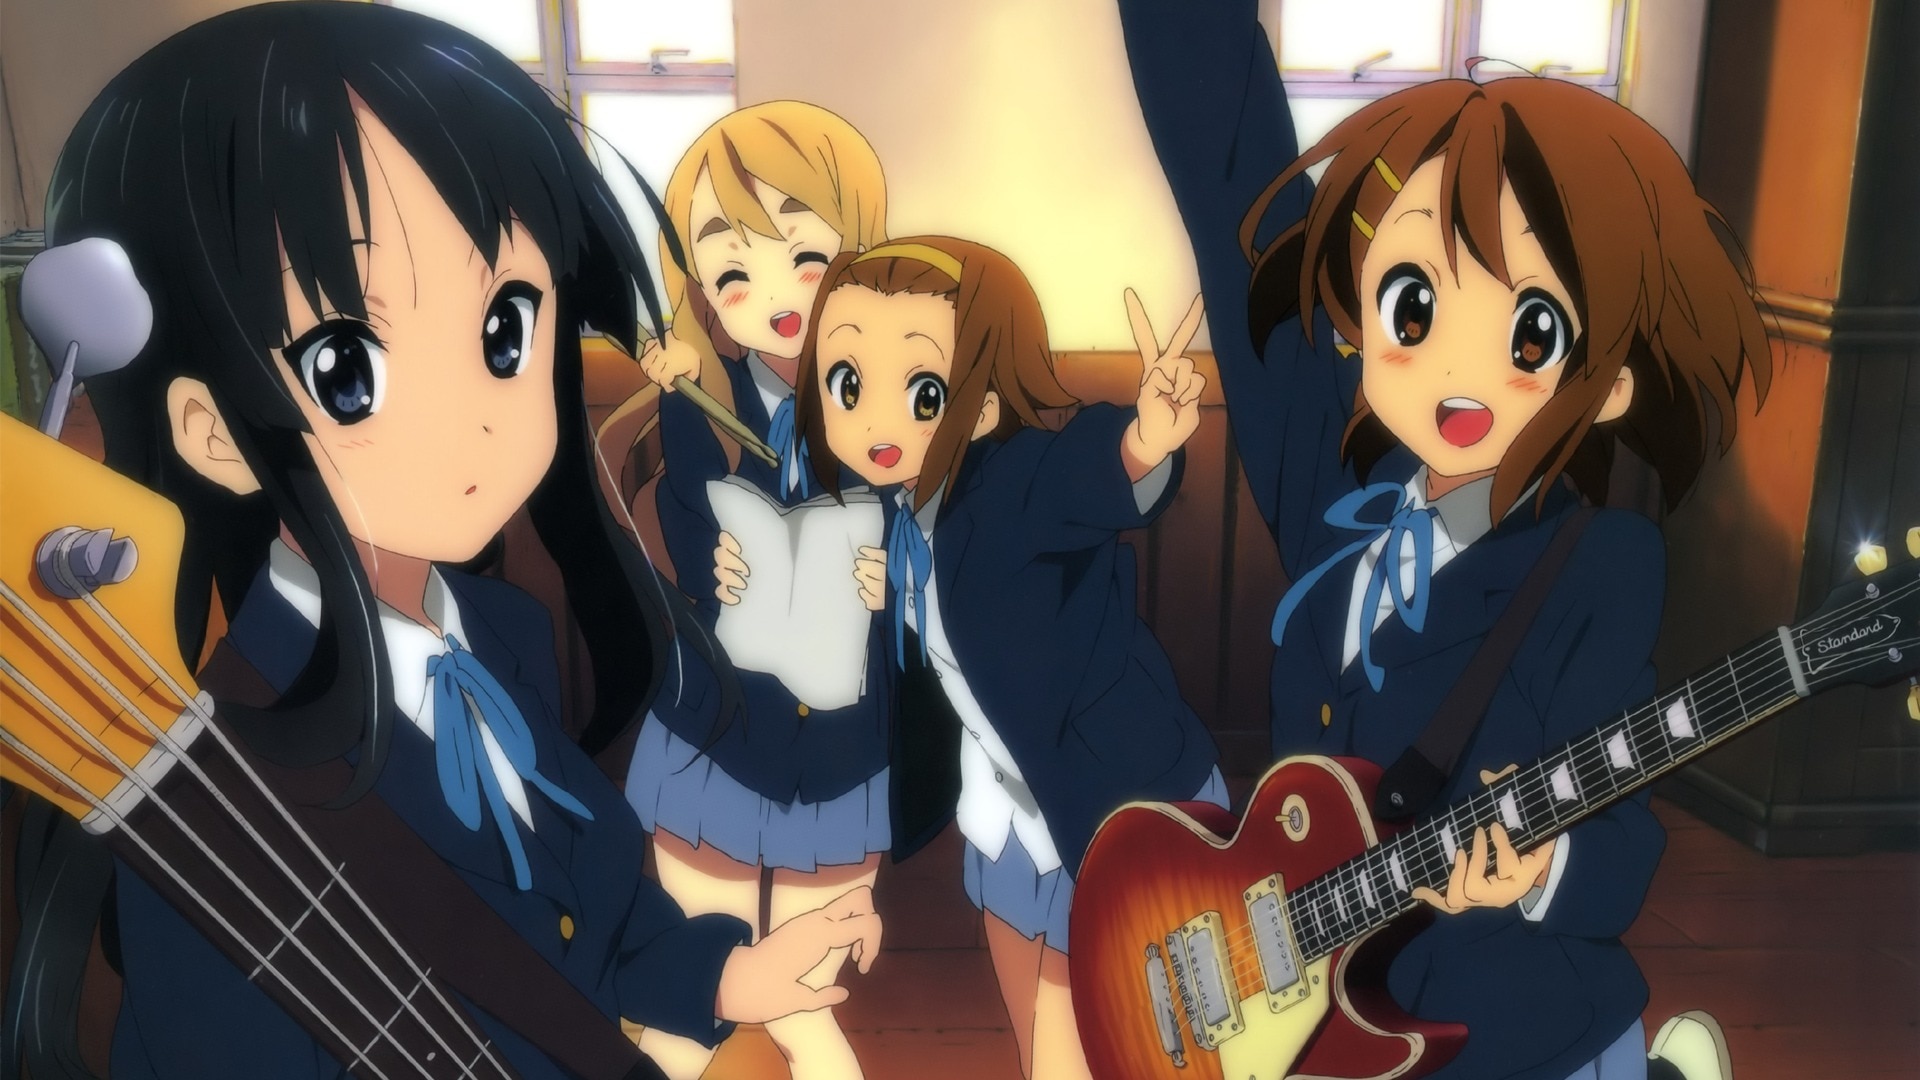 Fuwa Fuwa TIME - Vocals Only (High Quality)【Yui ver.】K-On! 